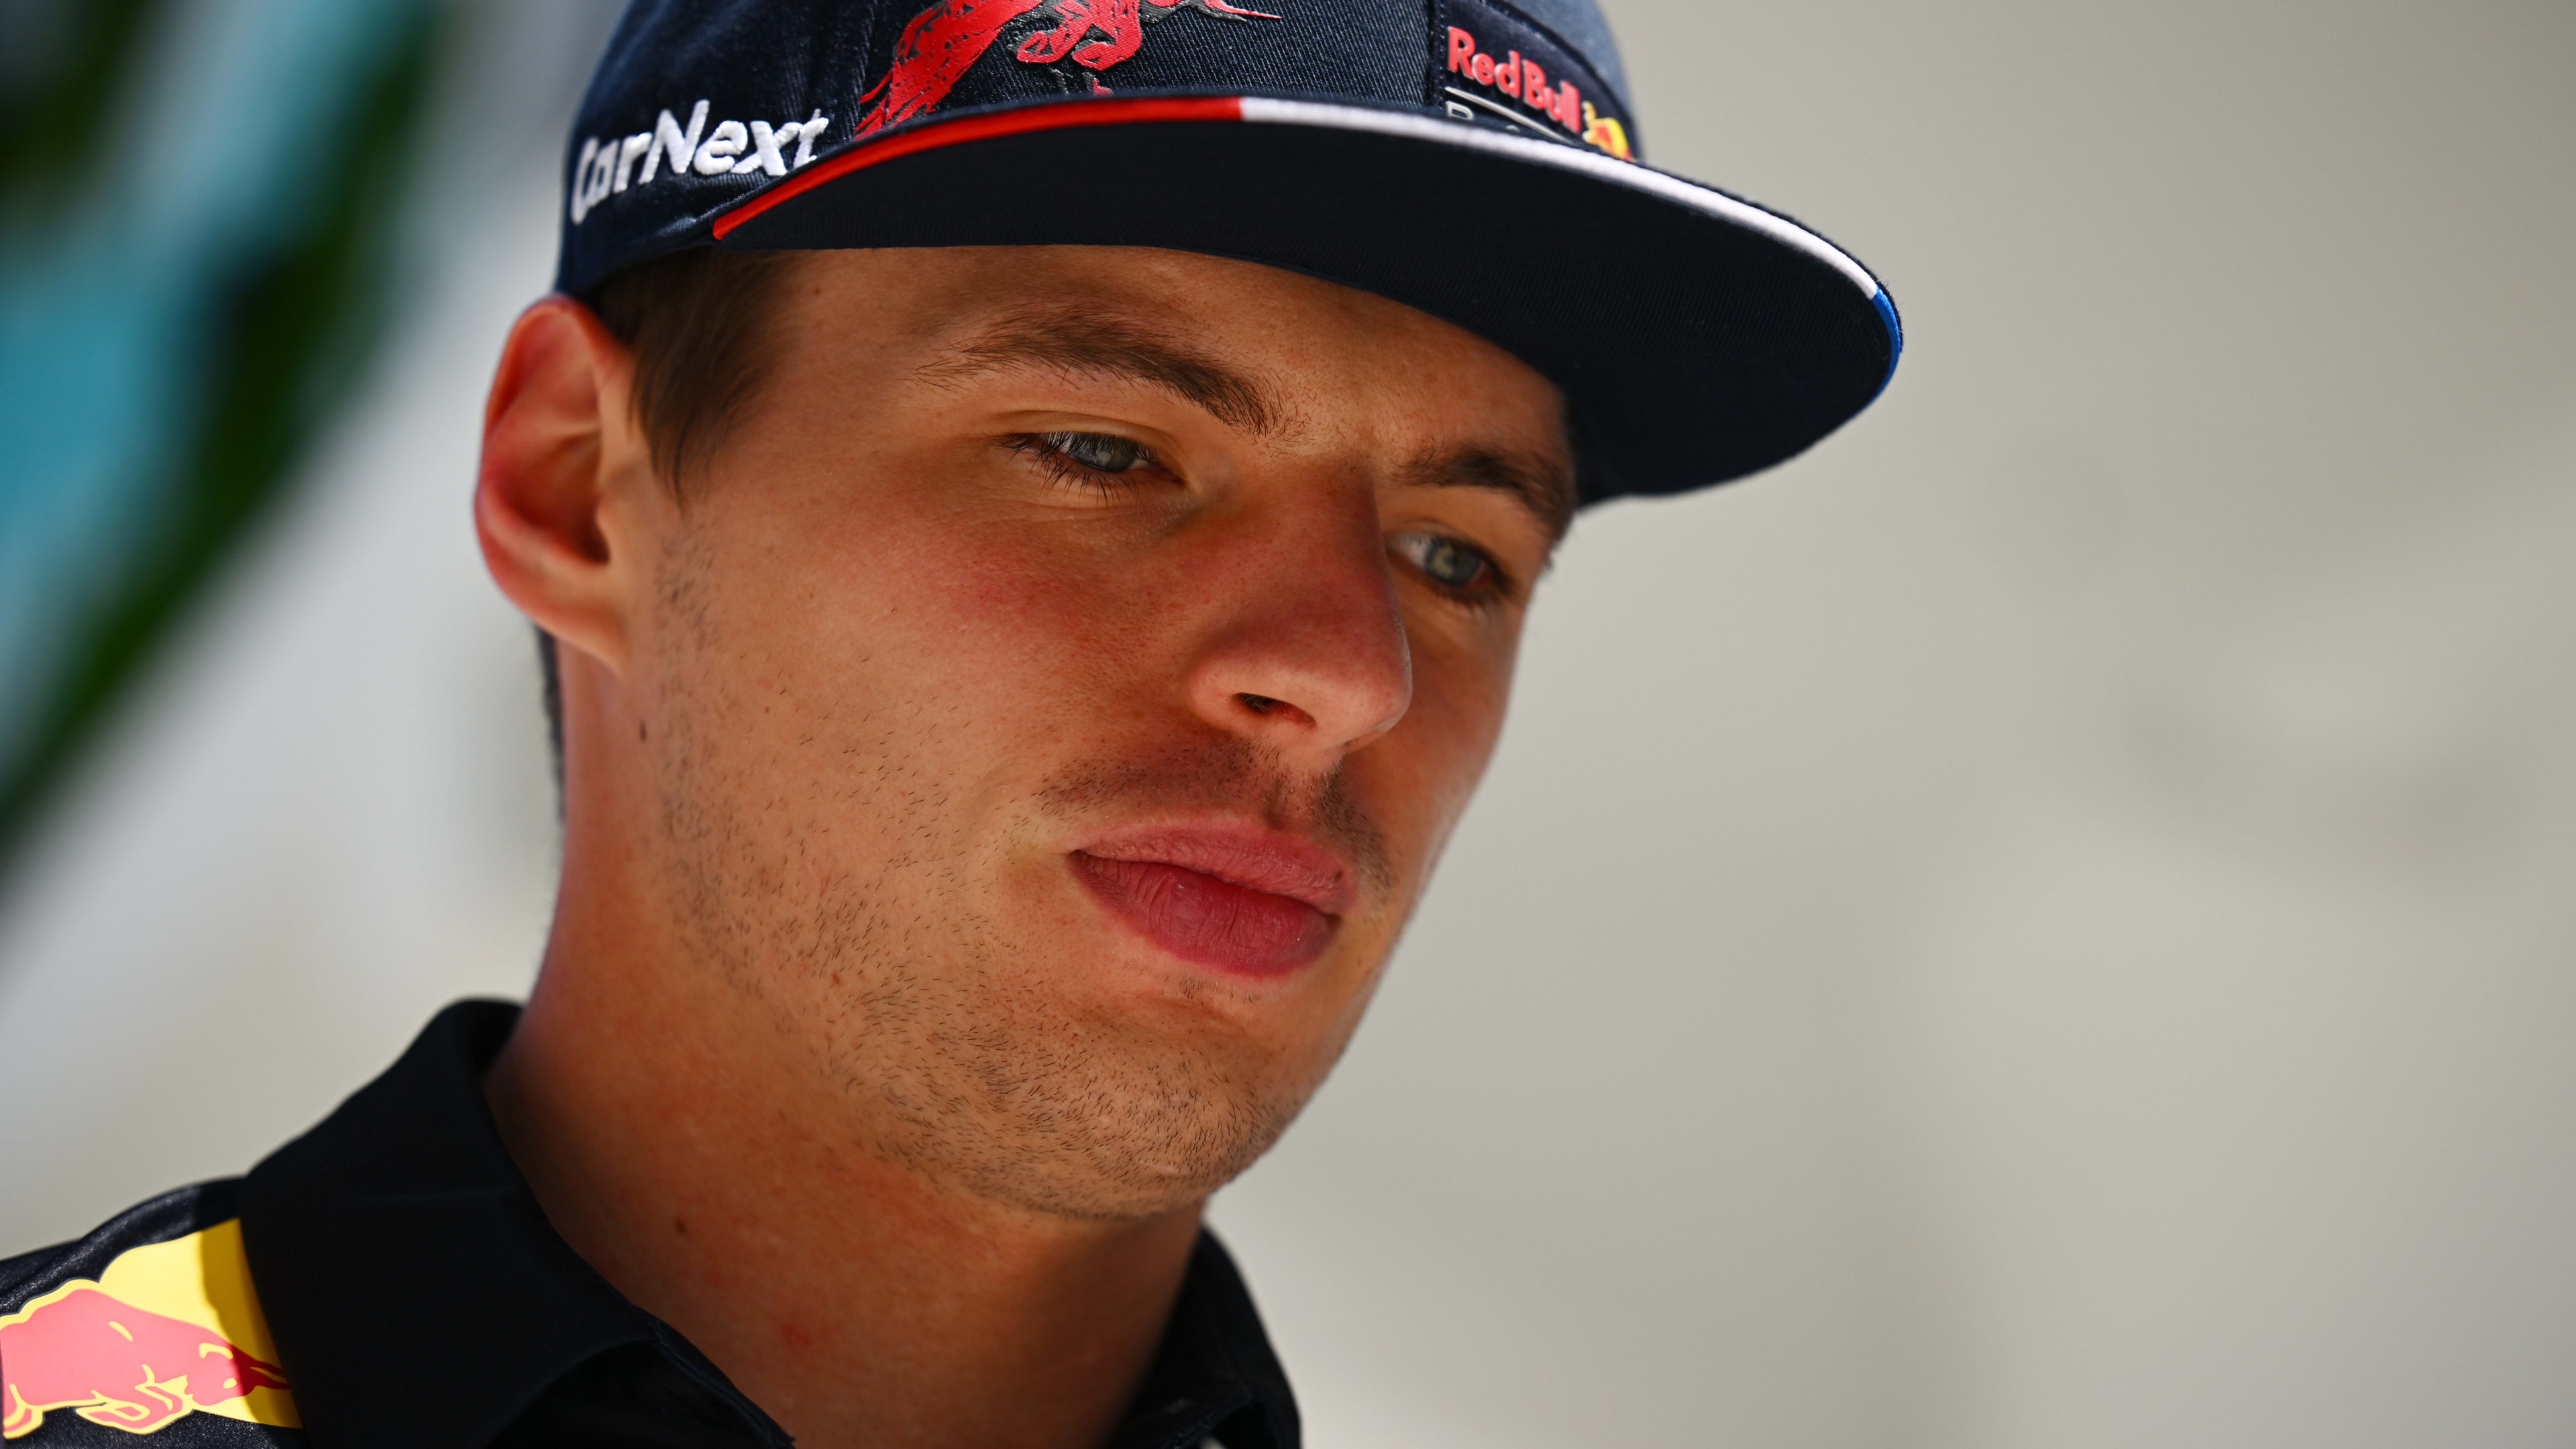 Verstappen laments 'extremely painful' start to Miami GP weekend as Red Bull endure rocky Friday - Formula 1